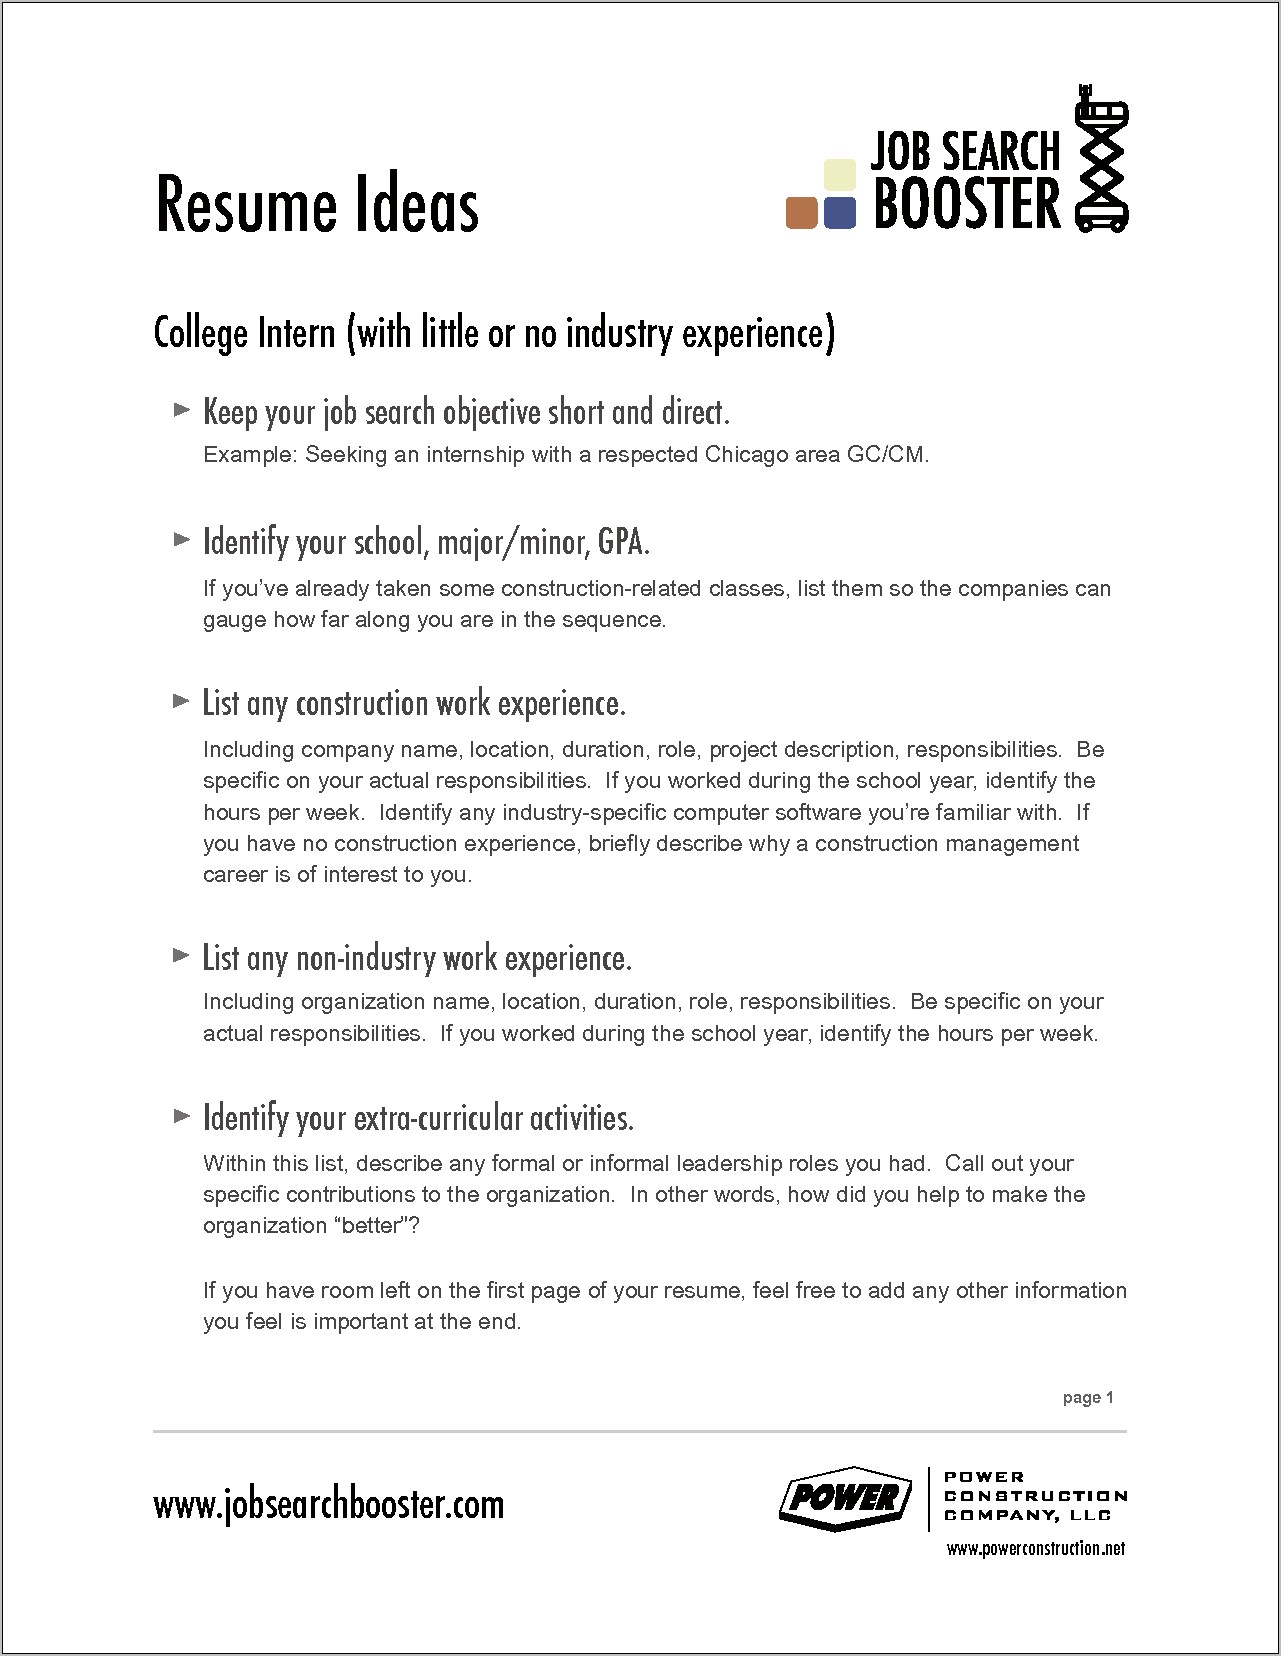 Resume Objective For All Jobs